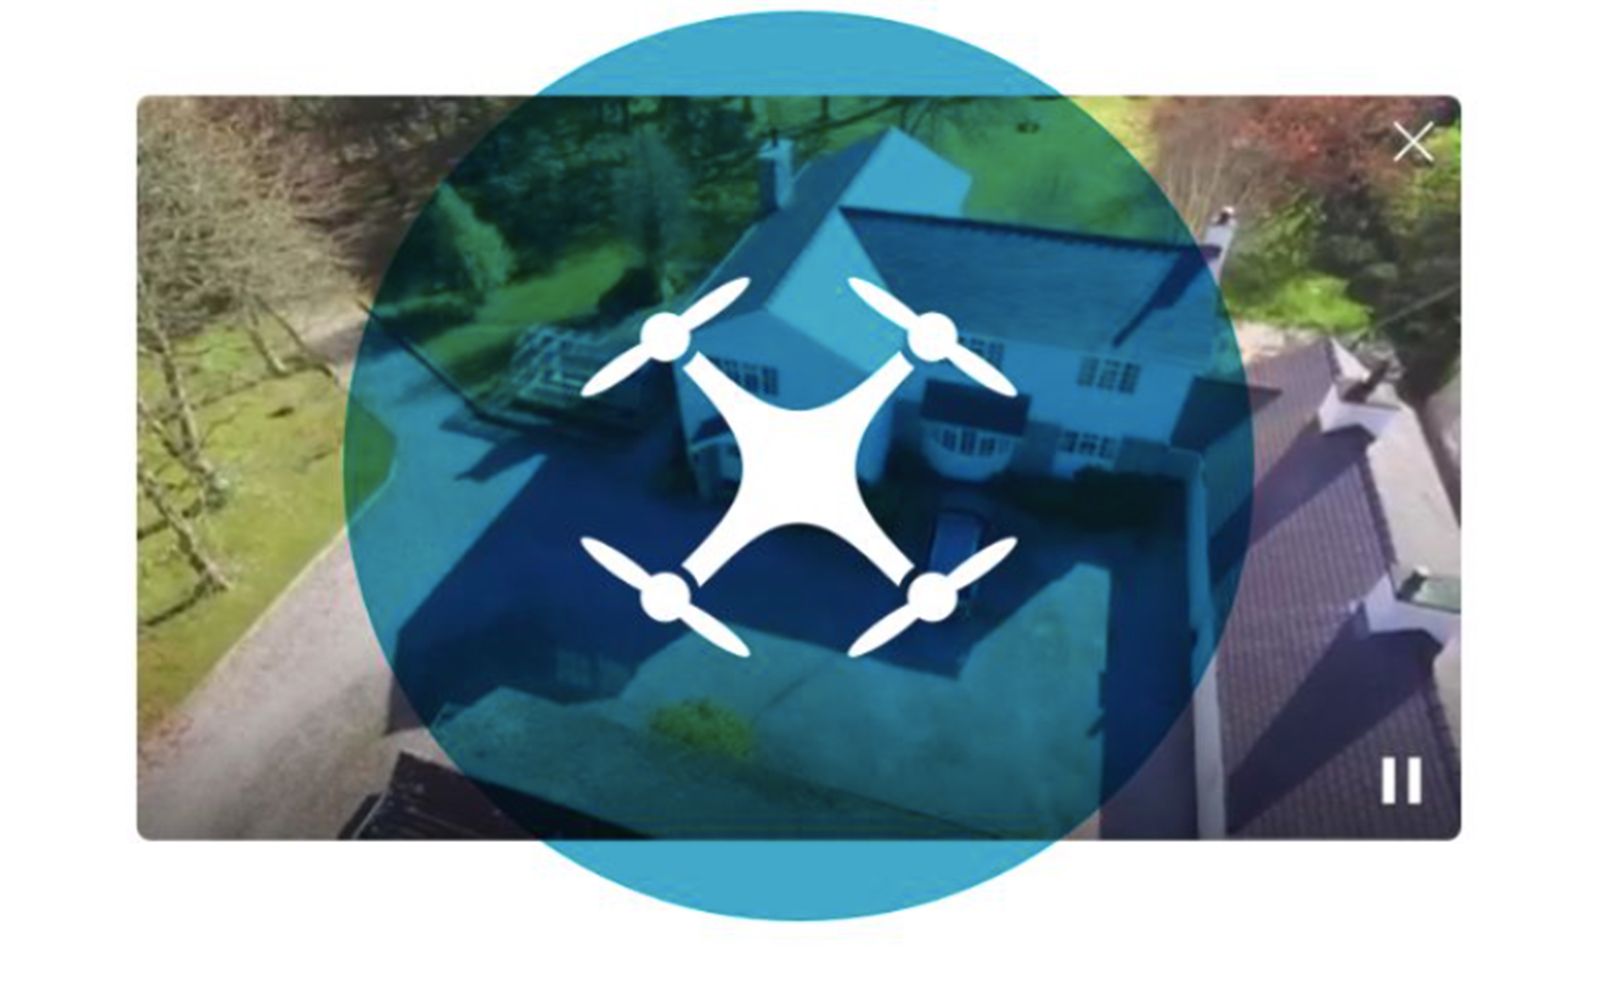 now you can periscope directly from your drone in the sky image 1